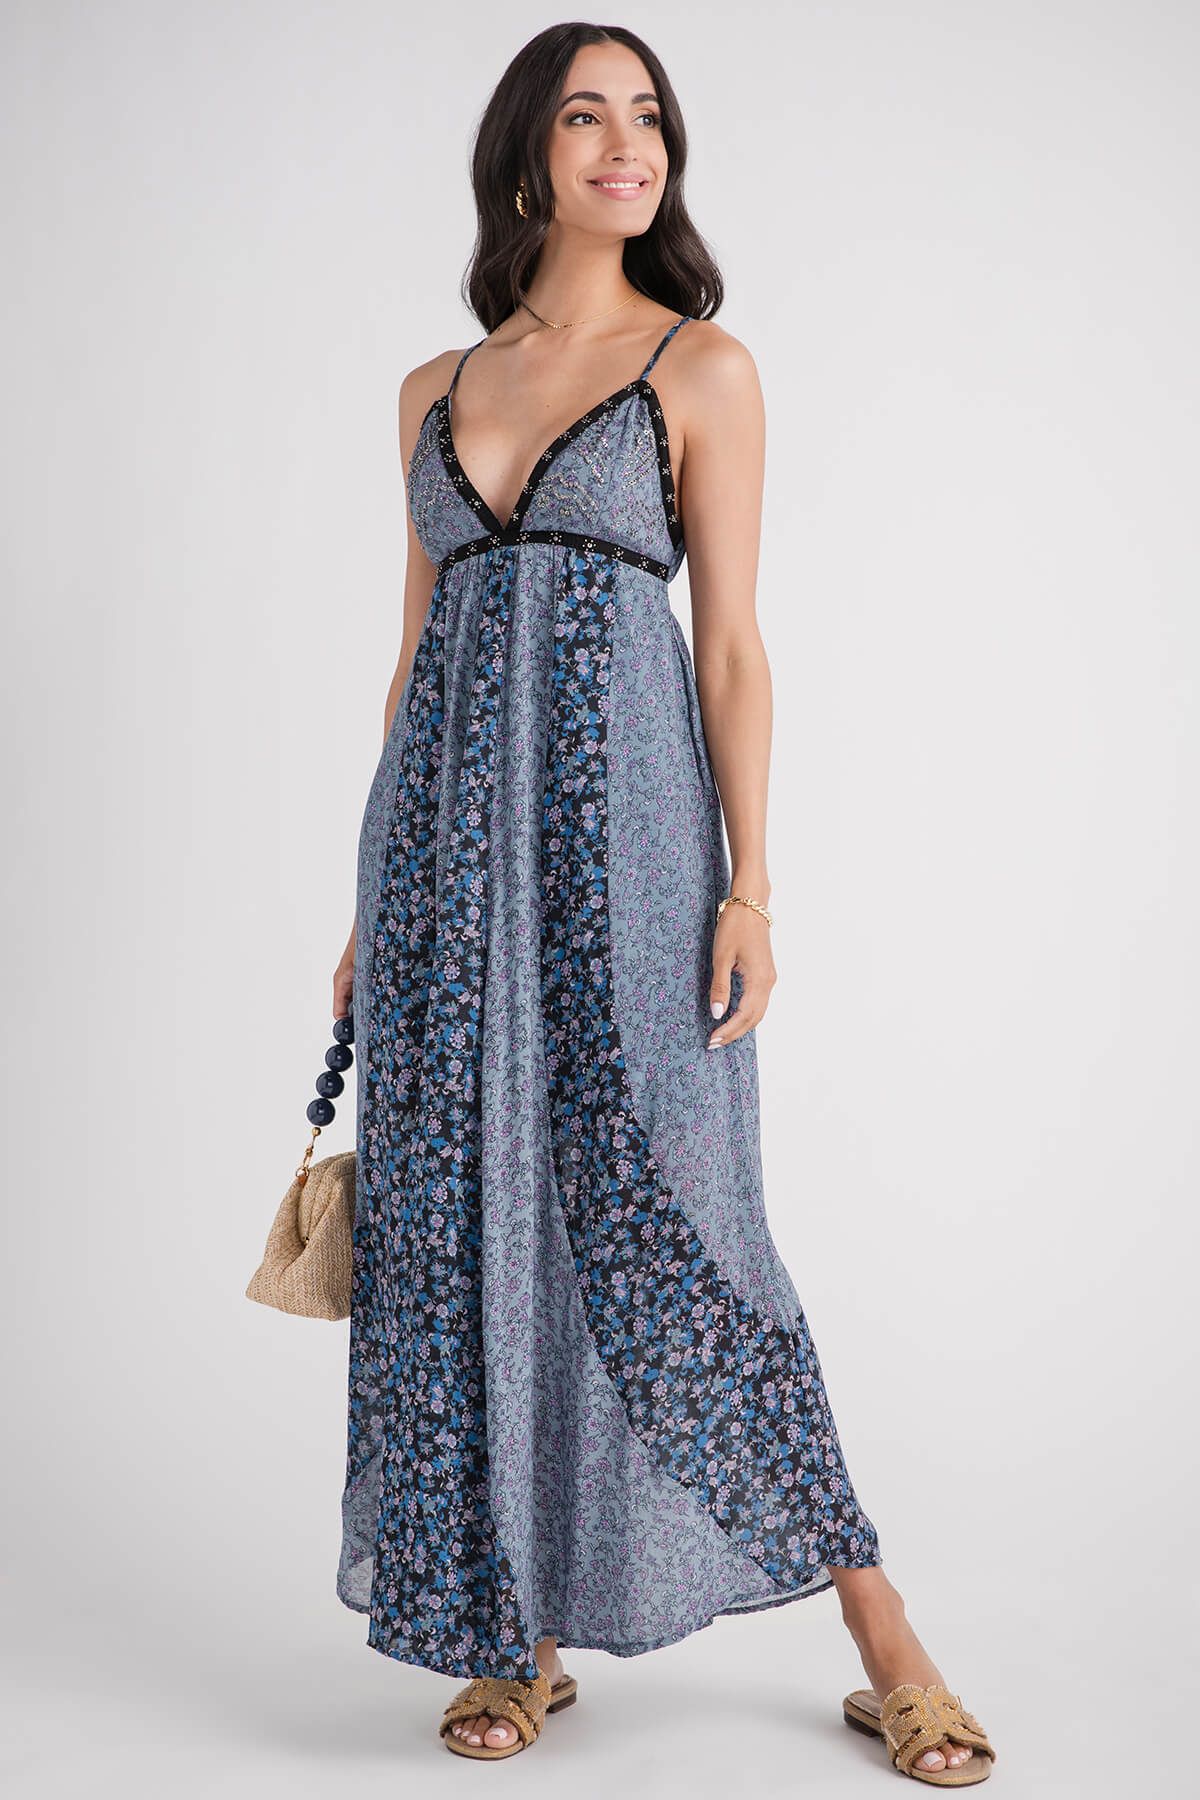 Free People Forever Time Dress | Social Threads